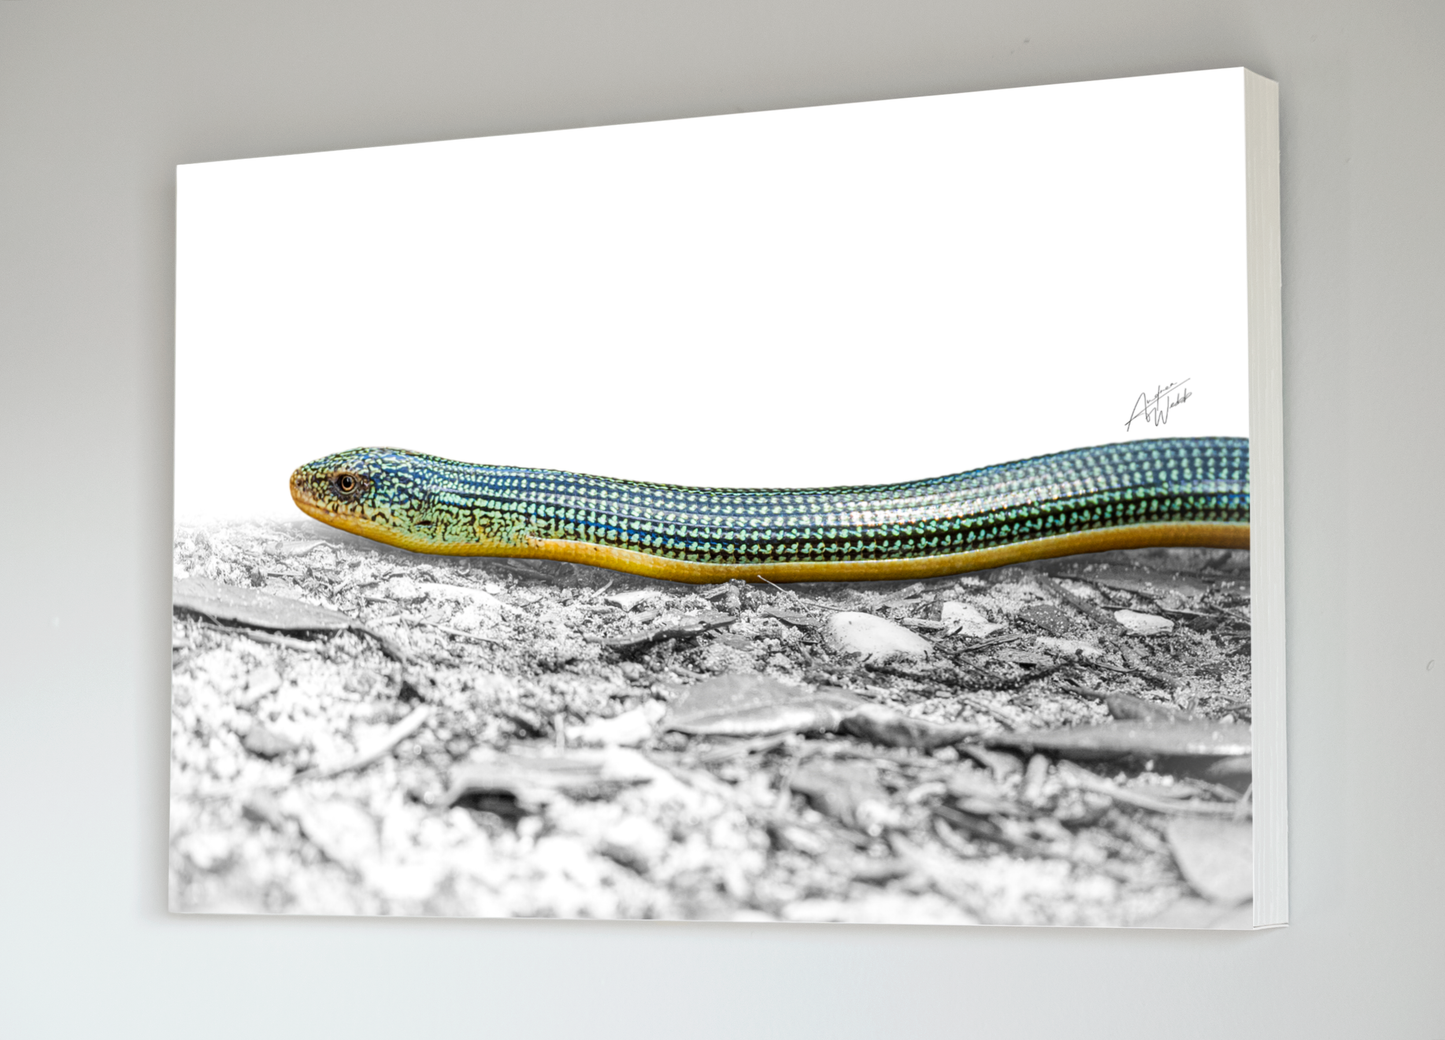 The Eastern Glass Lizard is commonly found in the eastern half of the United States. They are generally a green or brown color, with a glassy appearance. Glass lizard portrait. Glass lizard art. Glass lizard artwork. Glass lizard photography. Animal Photography. Glass lizard wall art. Glass lizard gifts.